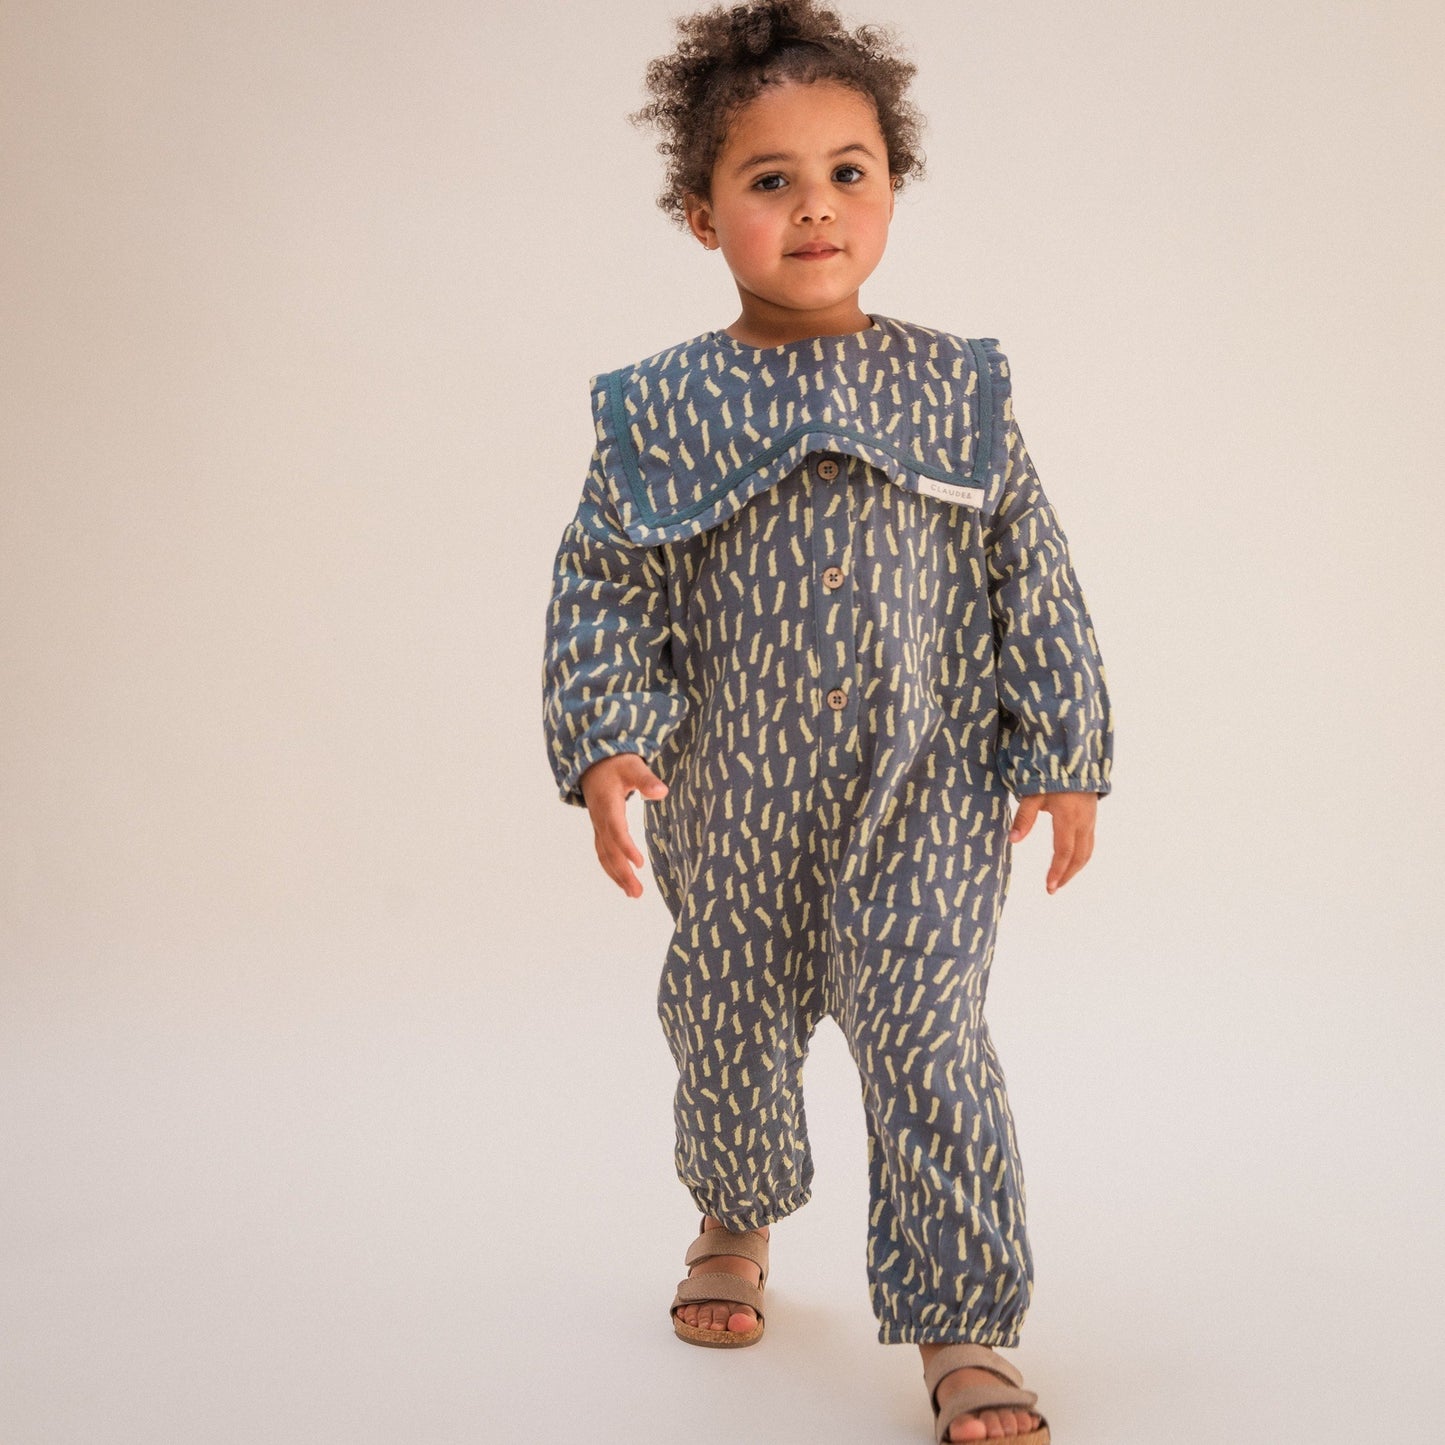 The brand new Claude & Co Jumpsuit with collar-dash is available at Nottinghamshire Stockist Alf & Co. The children’s independent 